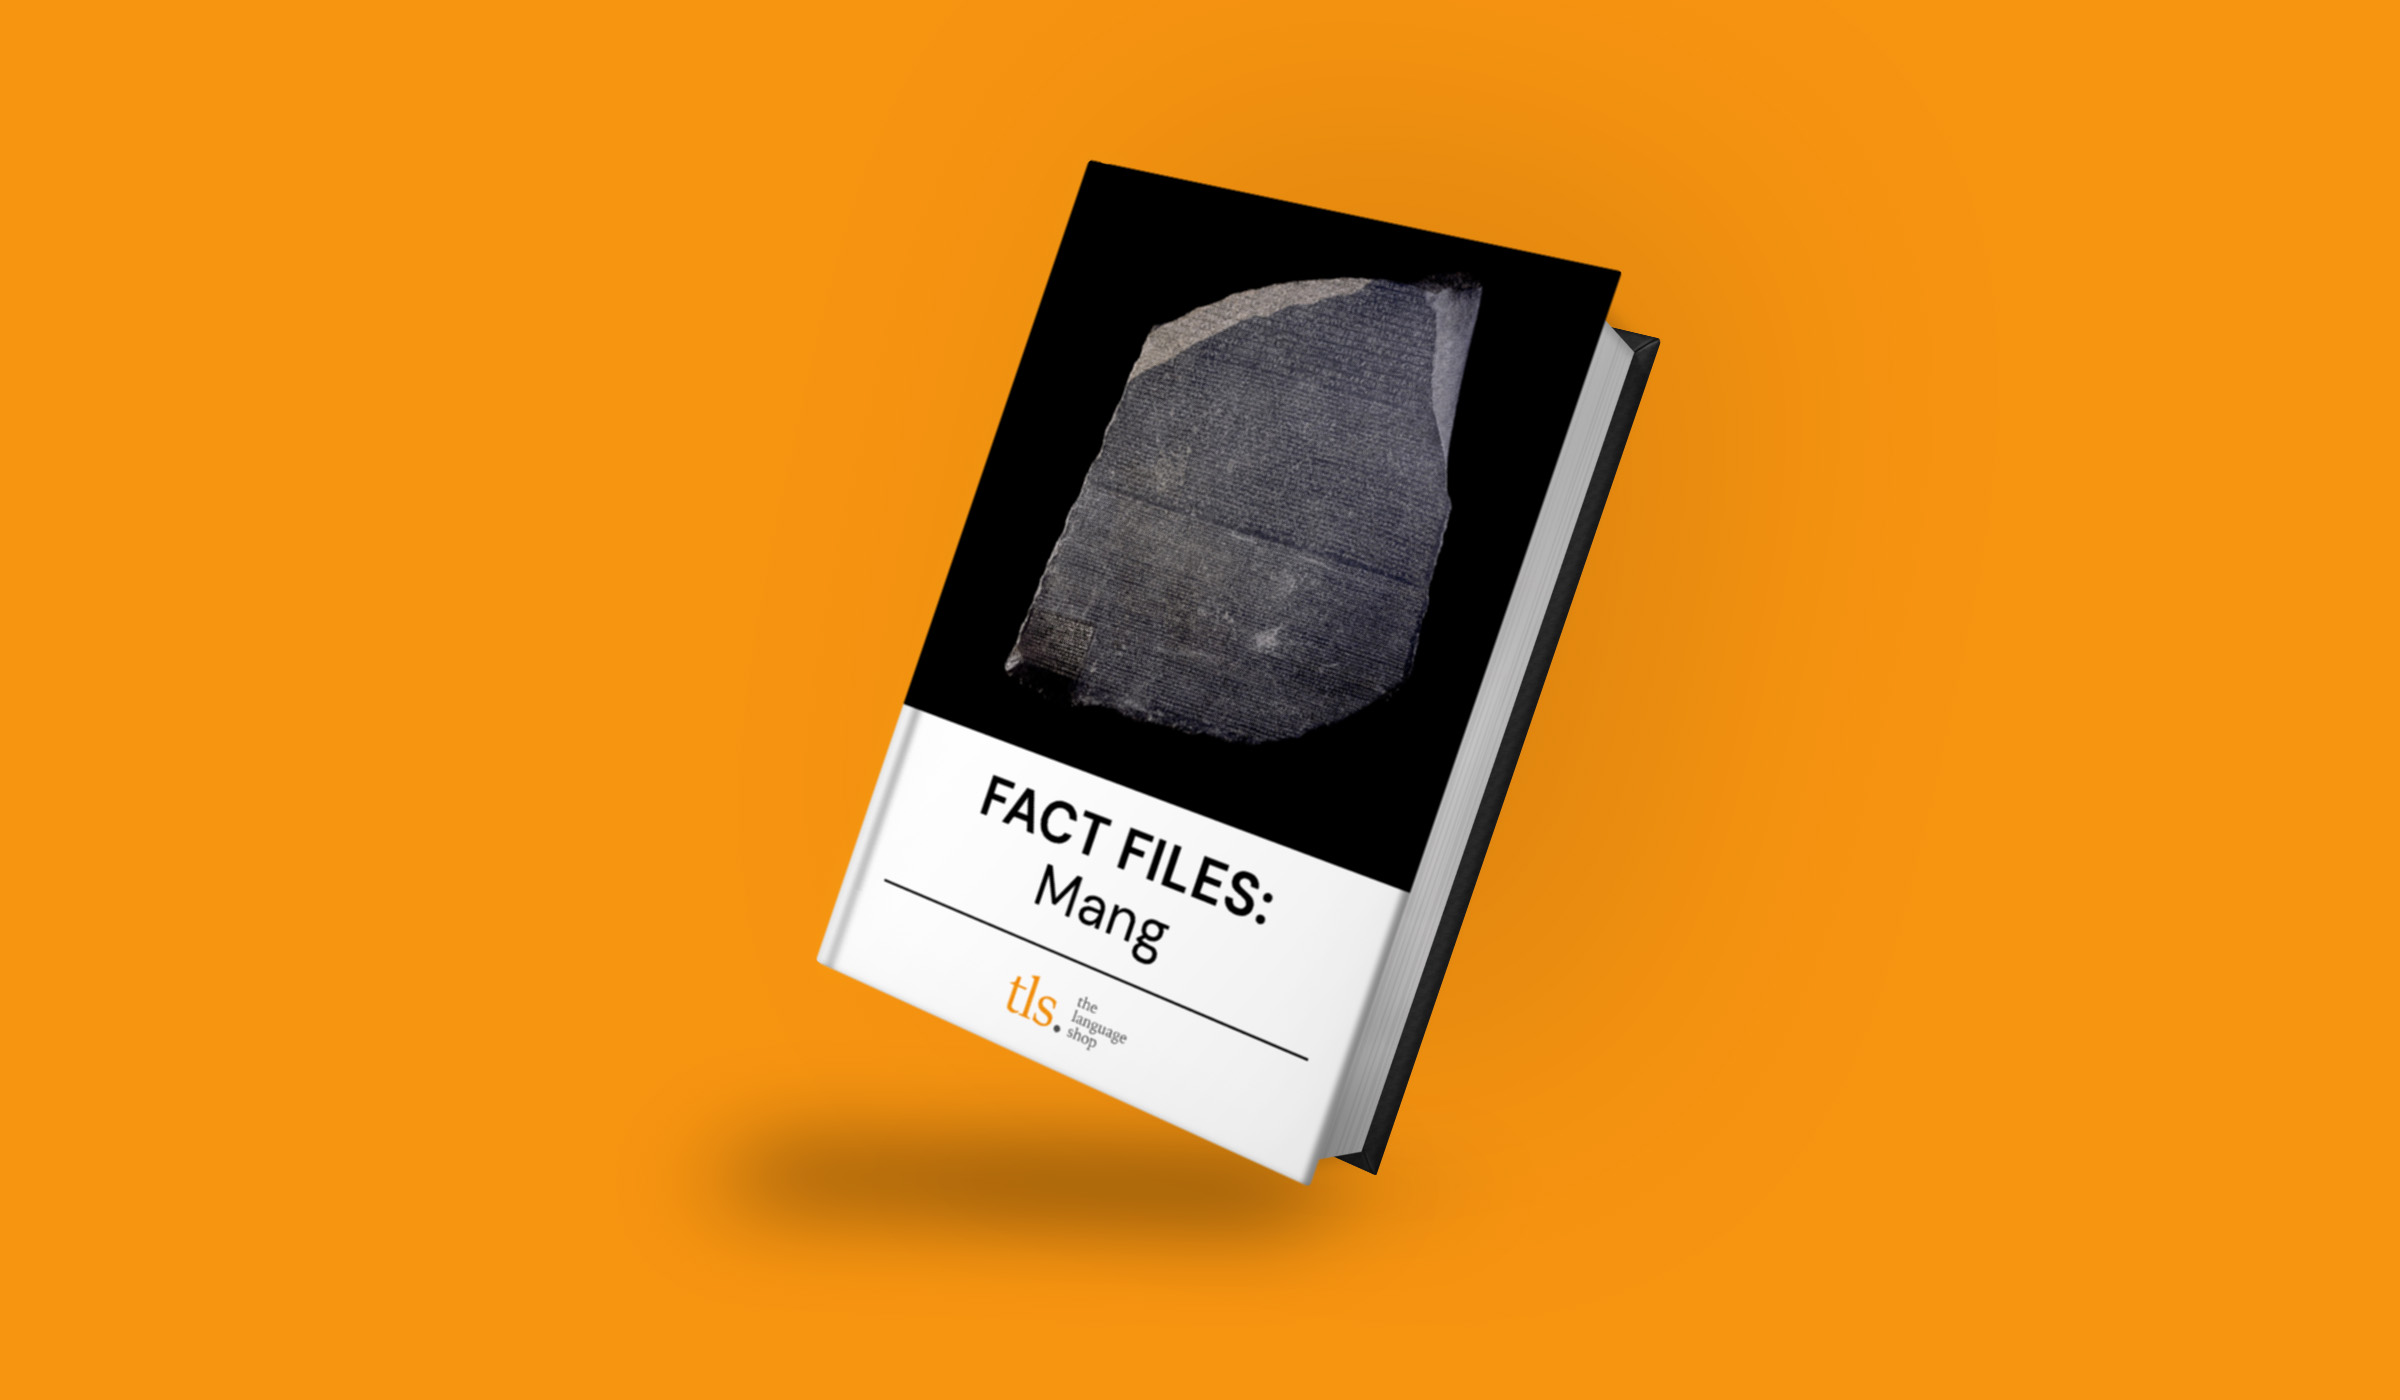 Book with title 'Fact file: Mang' on orange background